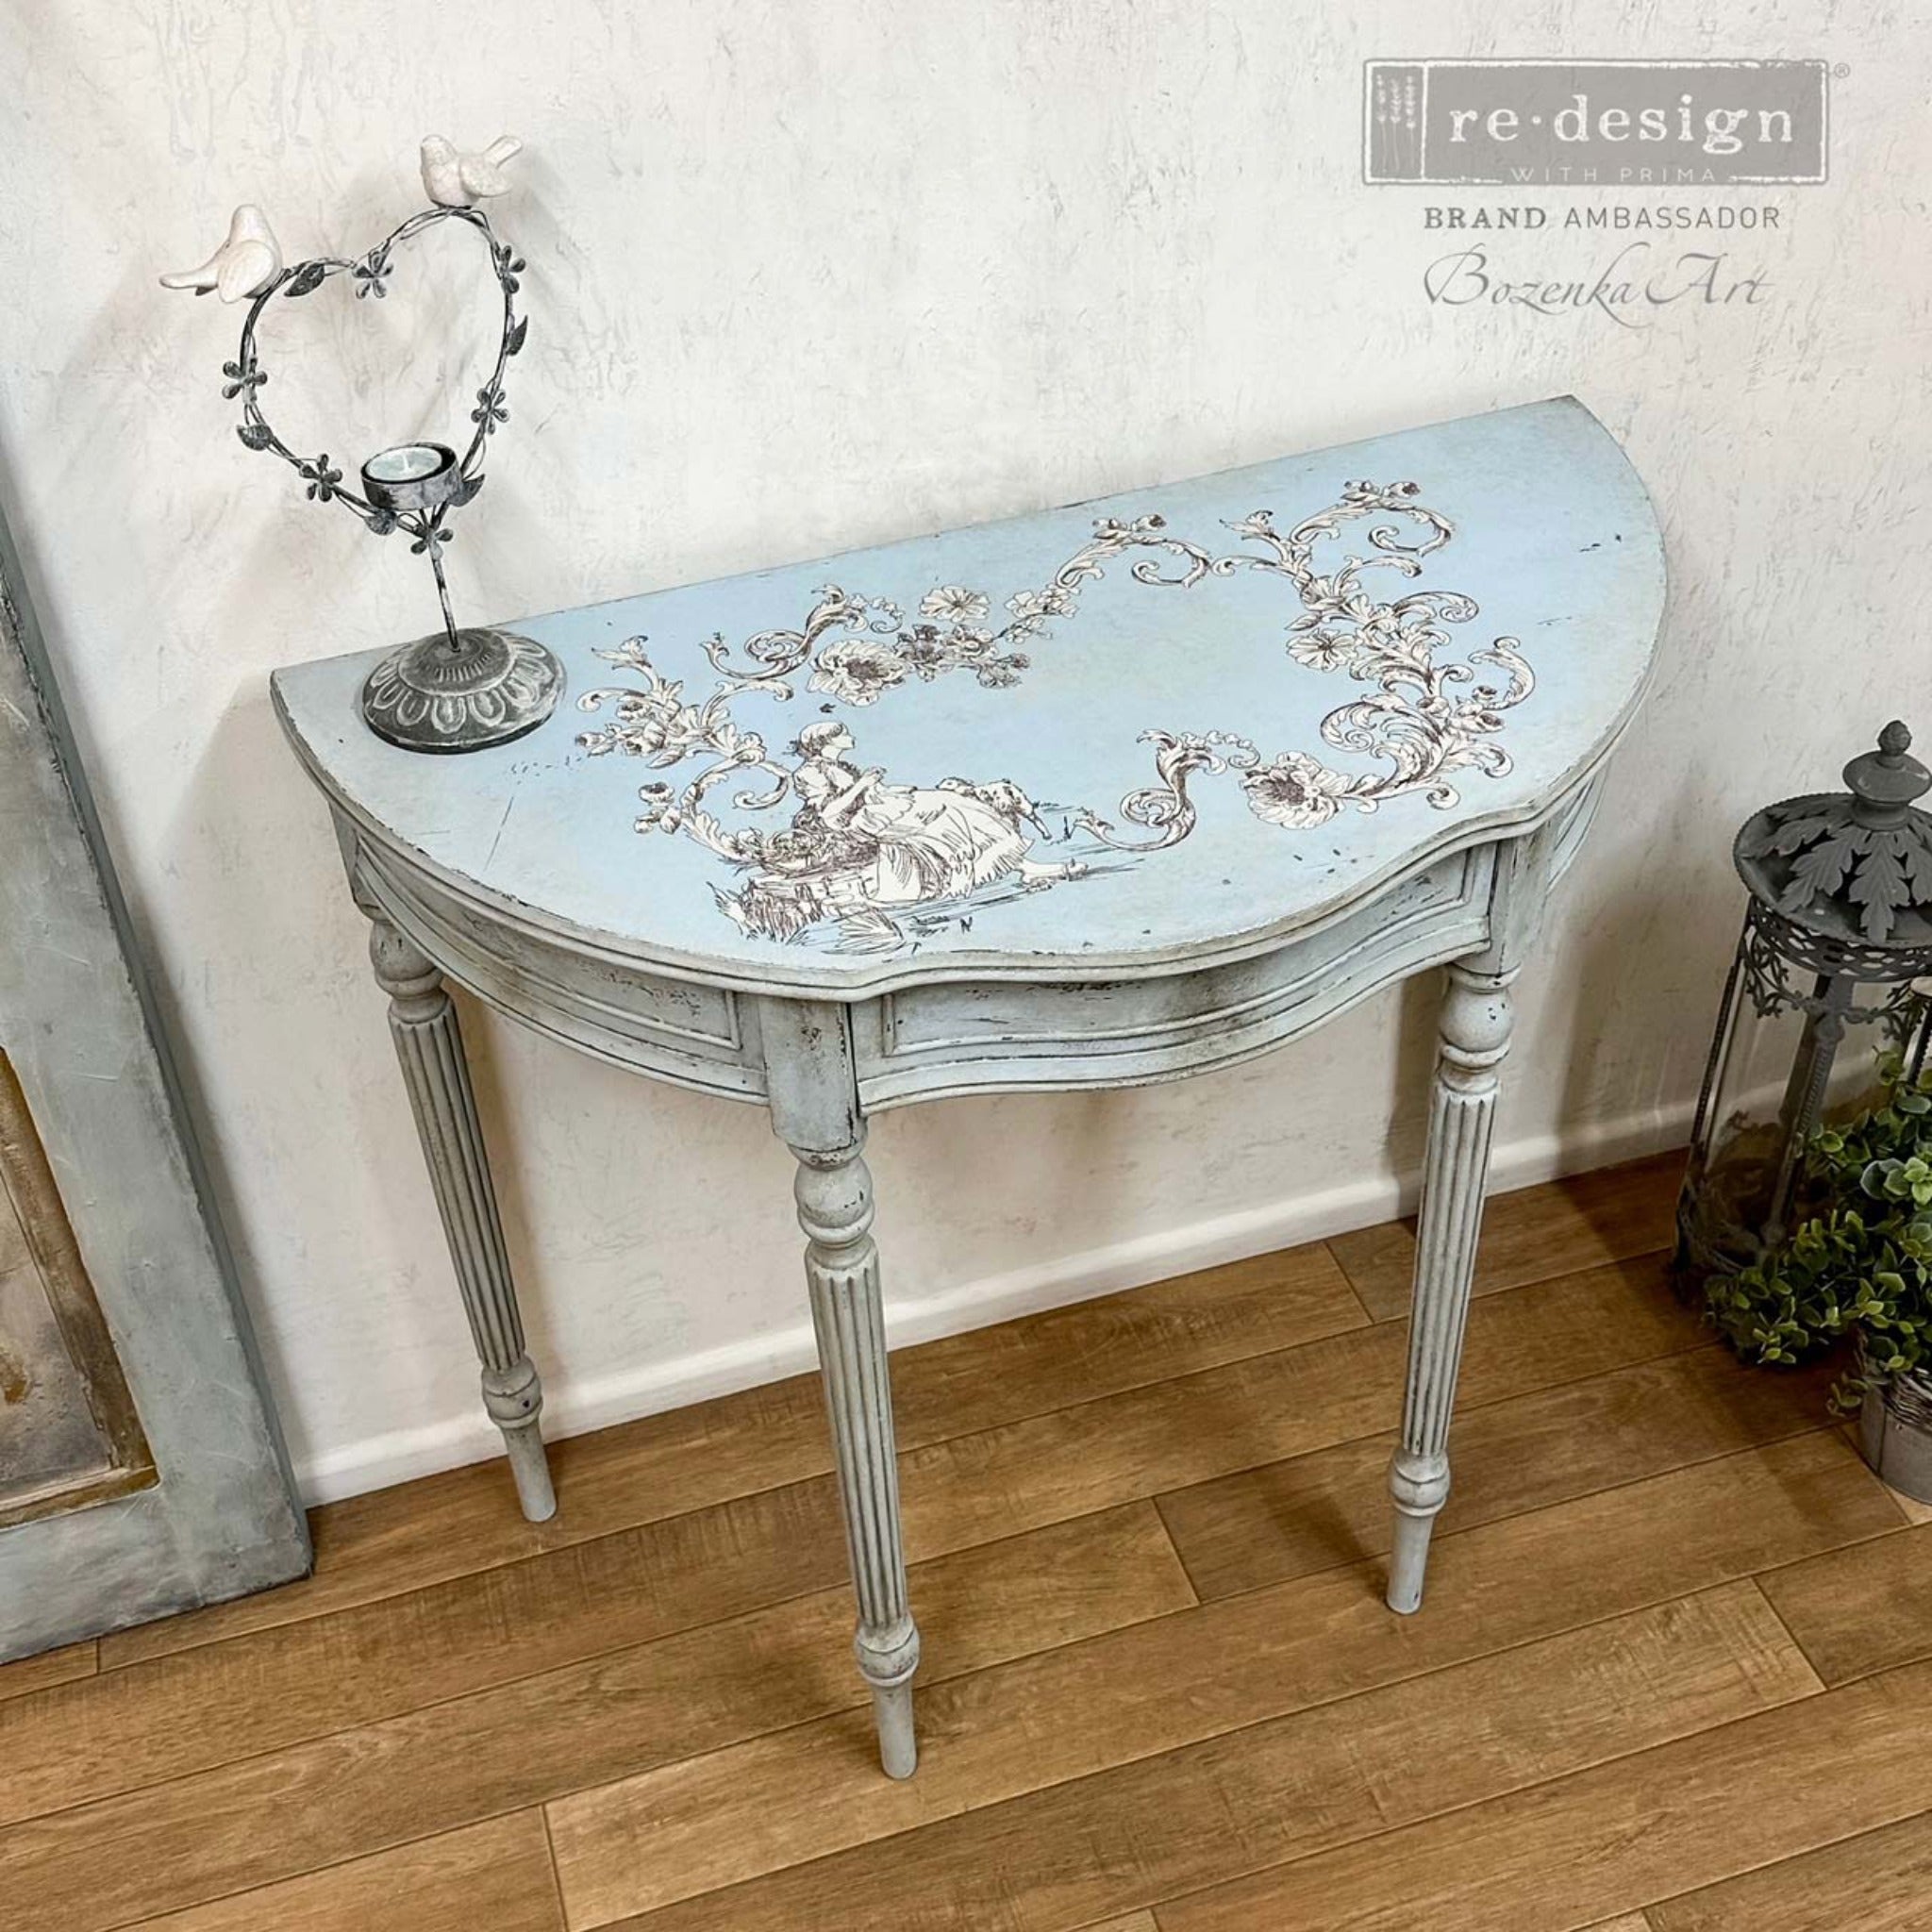 A vintage half-circle side table refurbished by Bozenka Art is painted pale blue and features ReDesign with Prima's Alaina Toile transfer on the top.